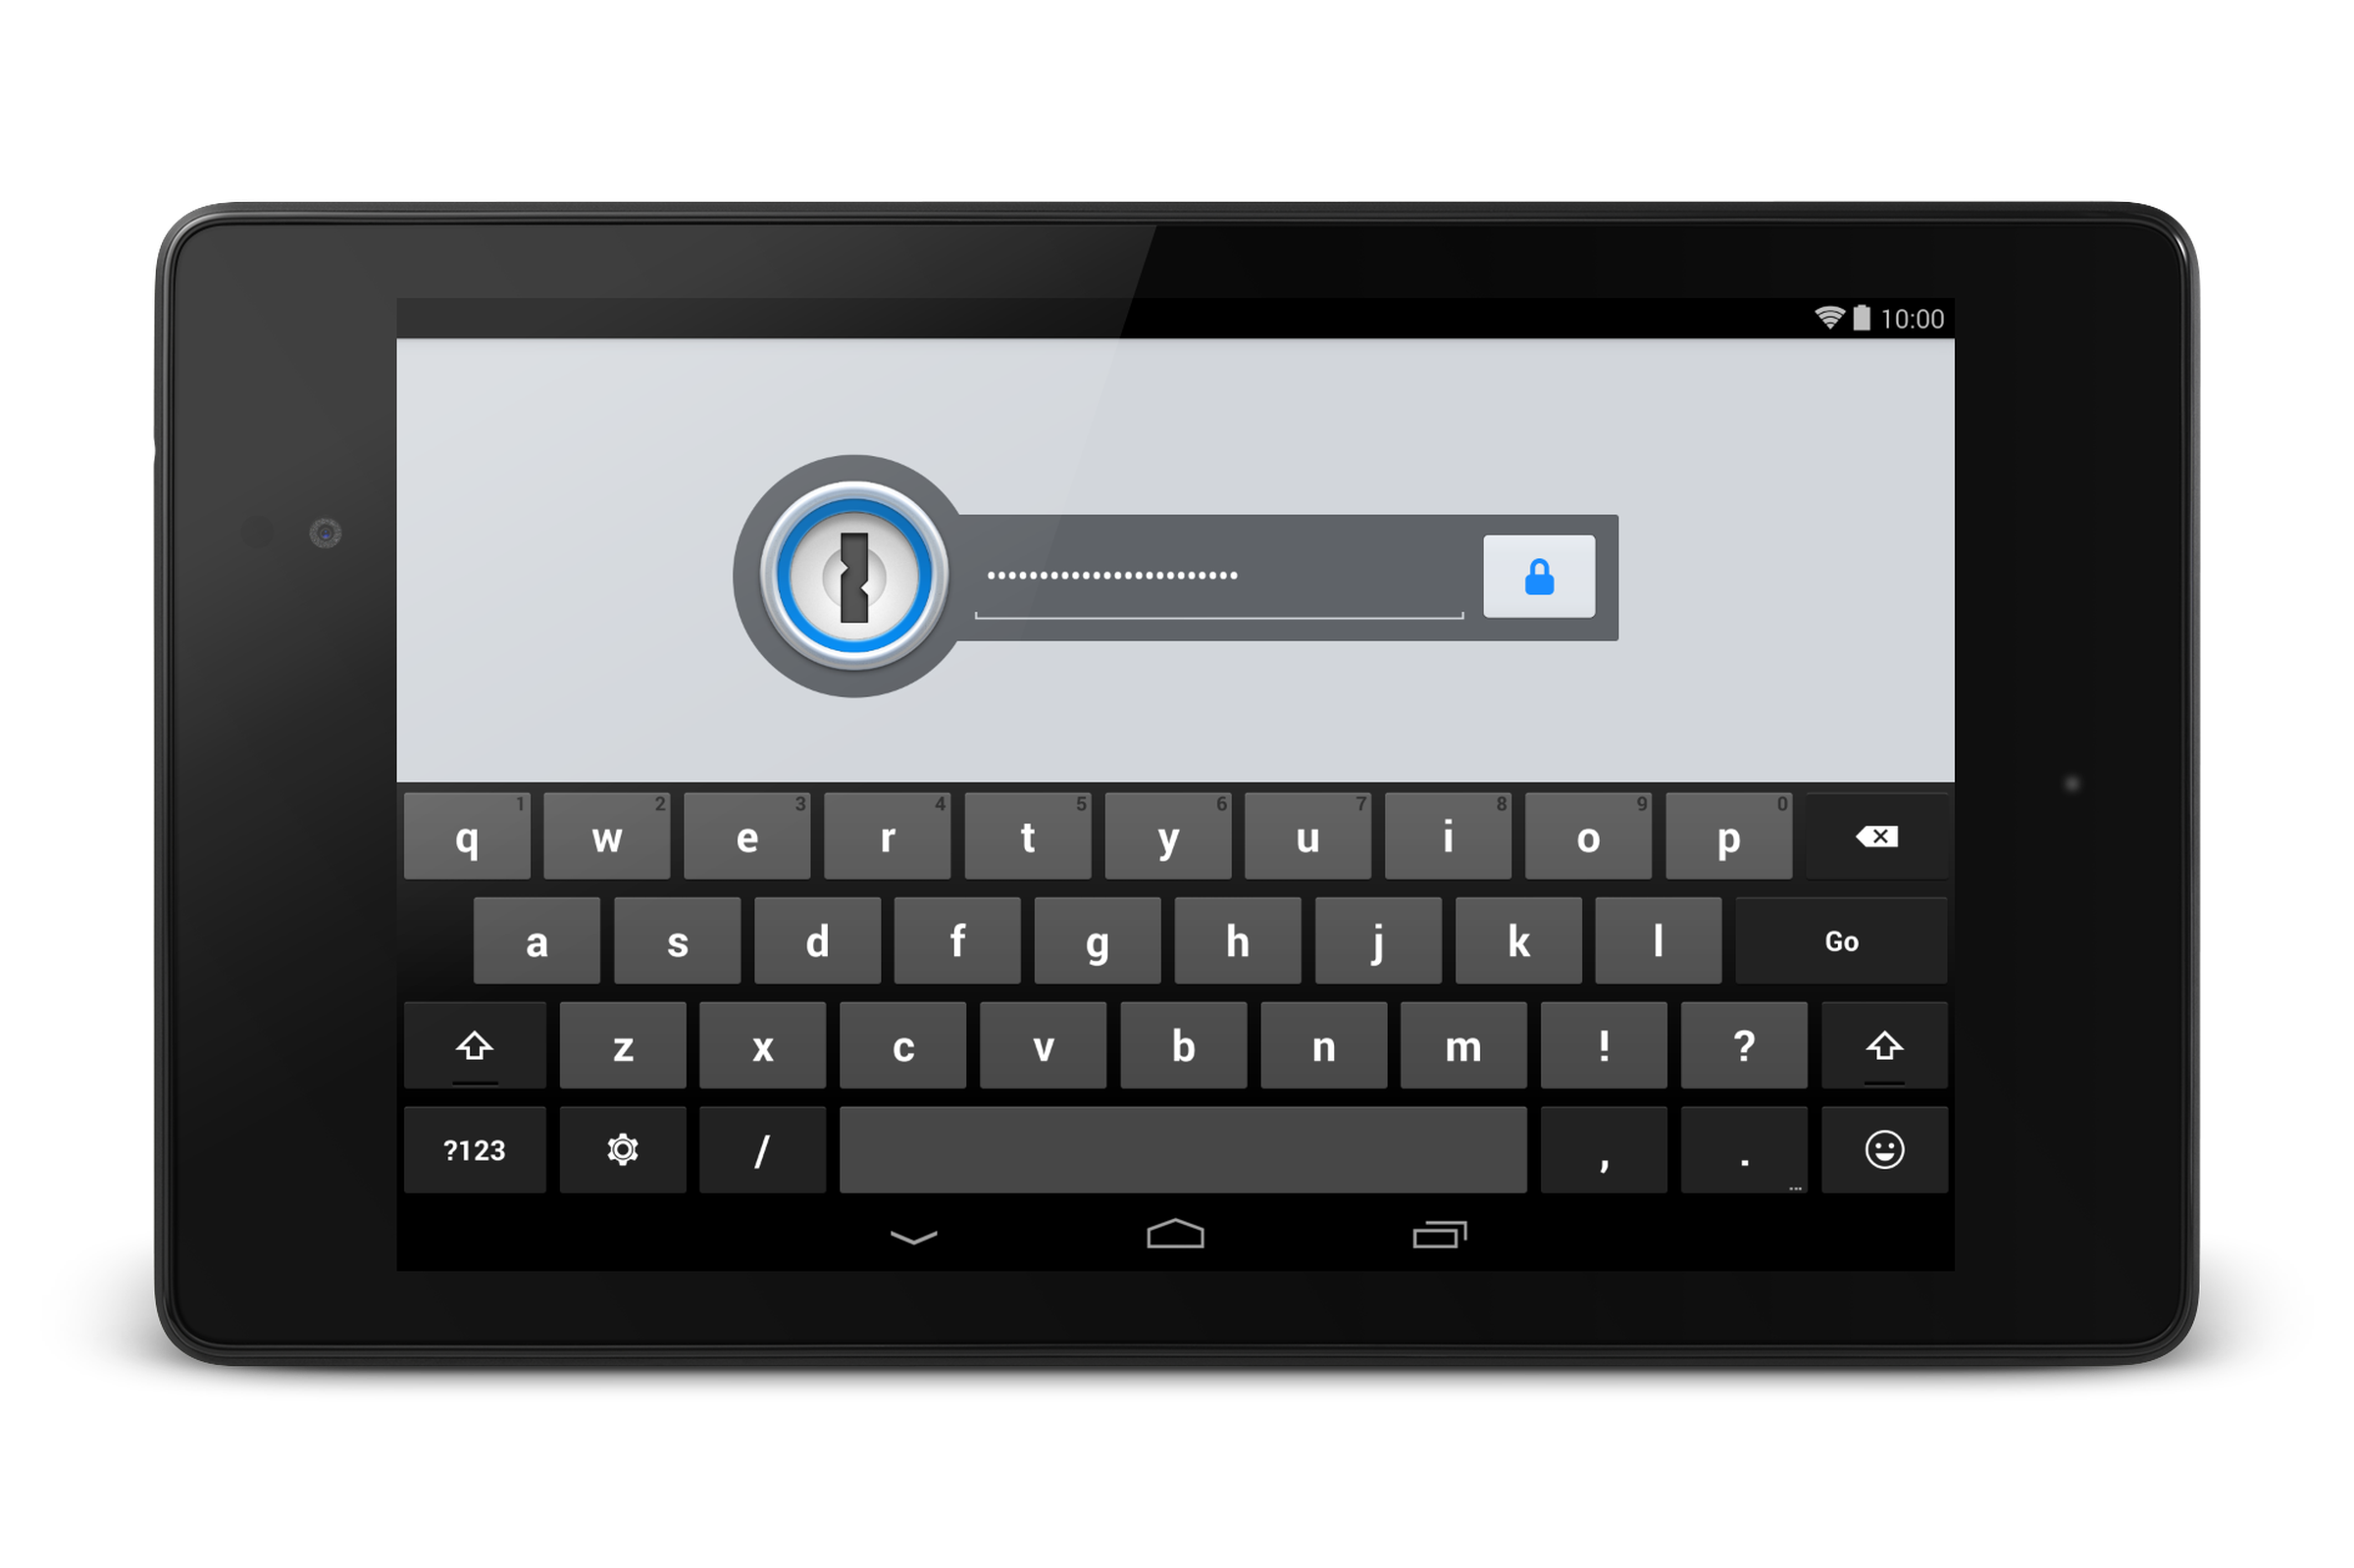 1Password for Android photos